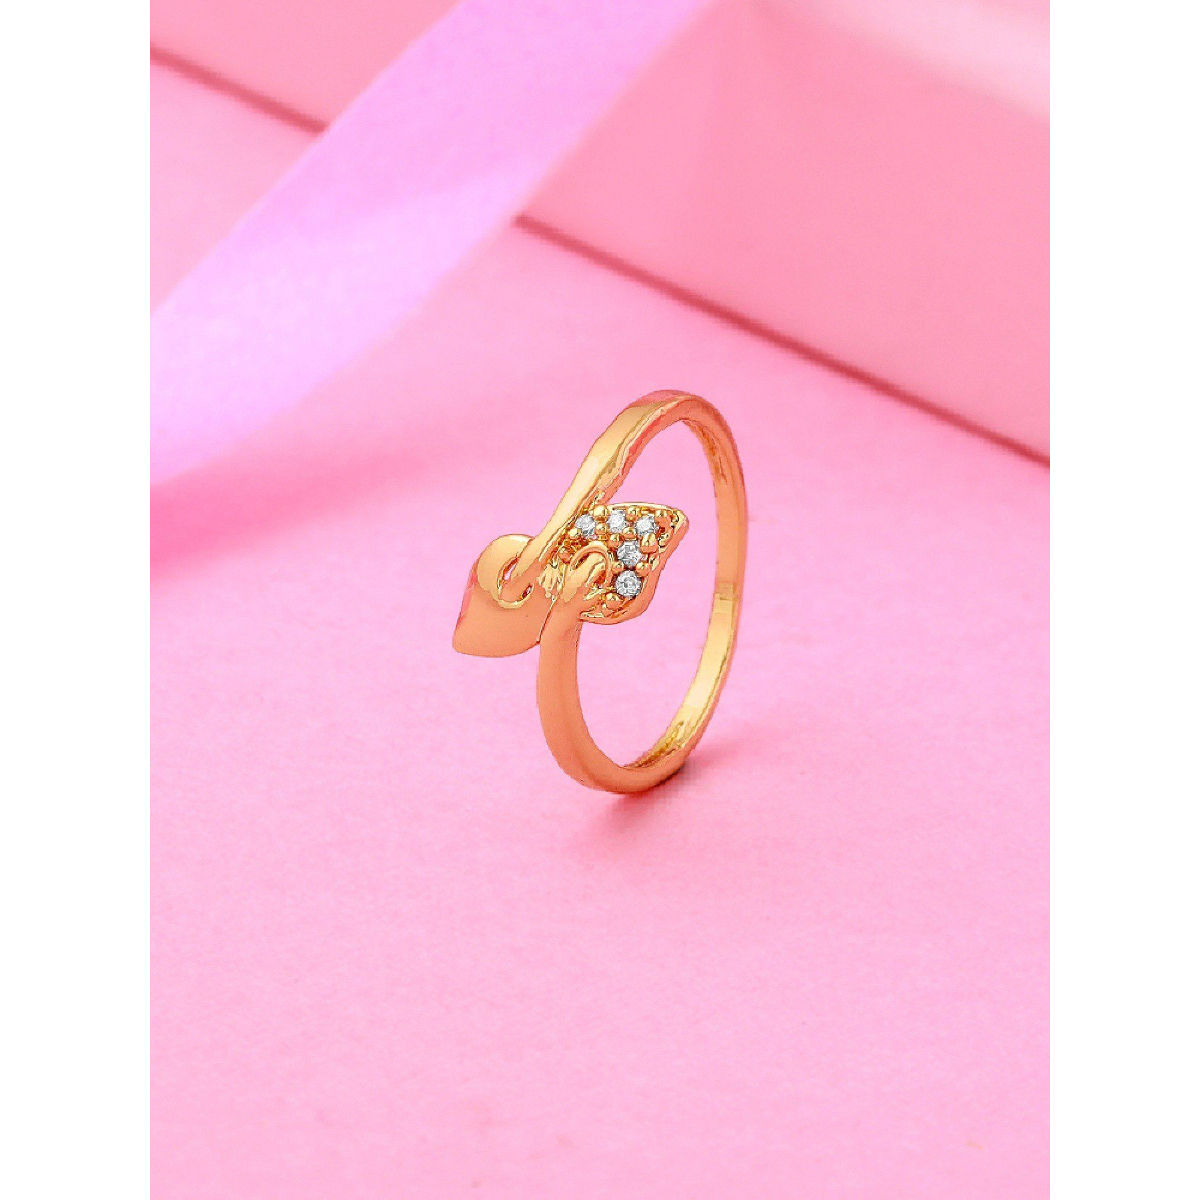 gold ring designs Images • mamta choudhary (@anku2436) on ShareChat